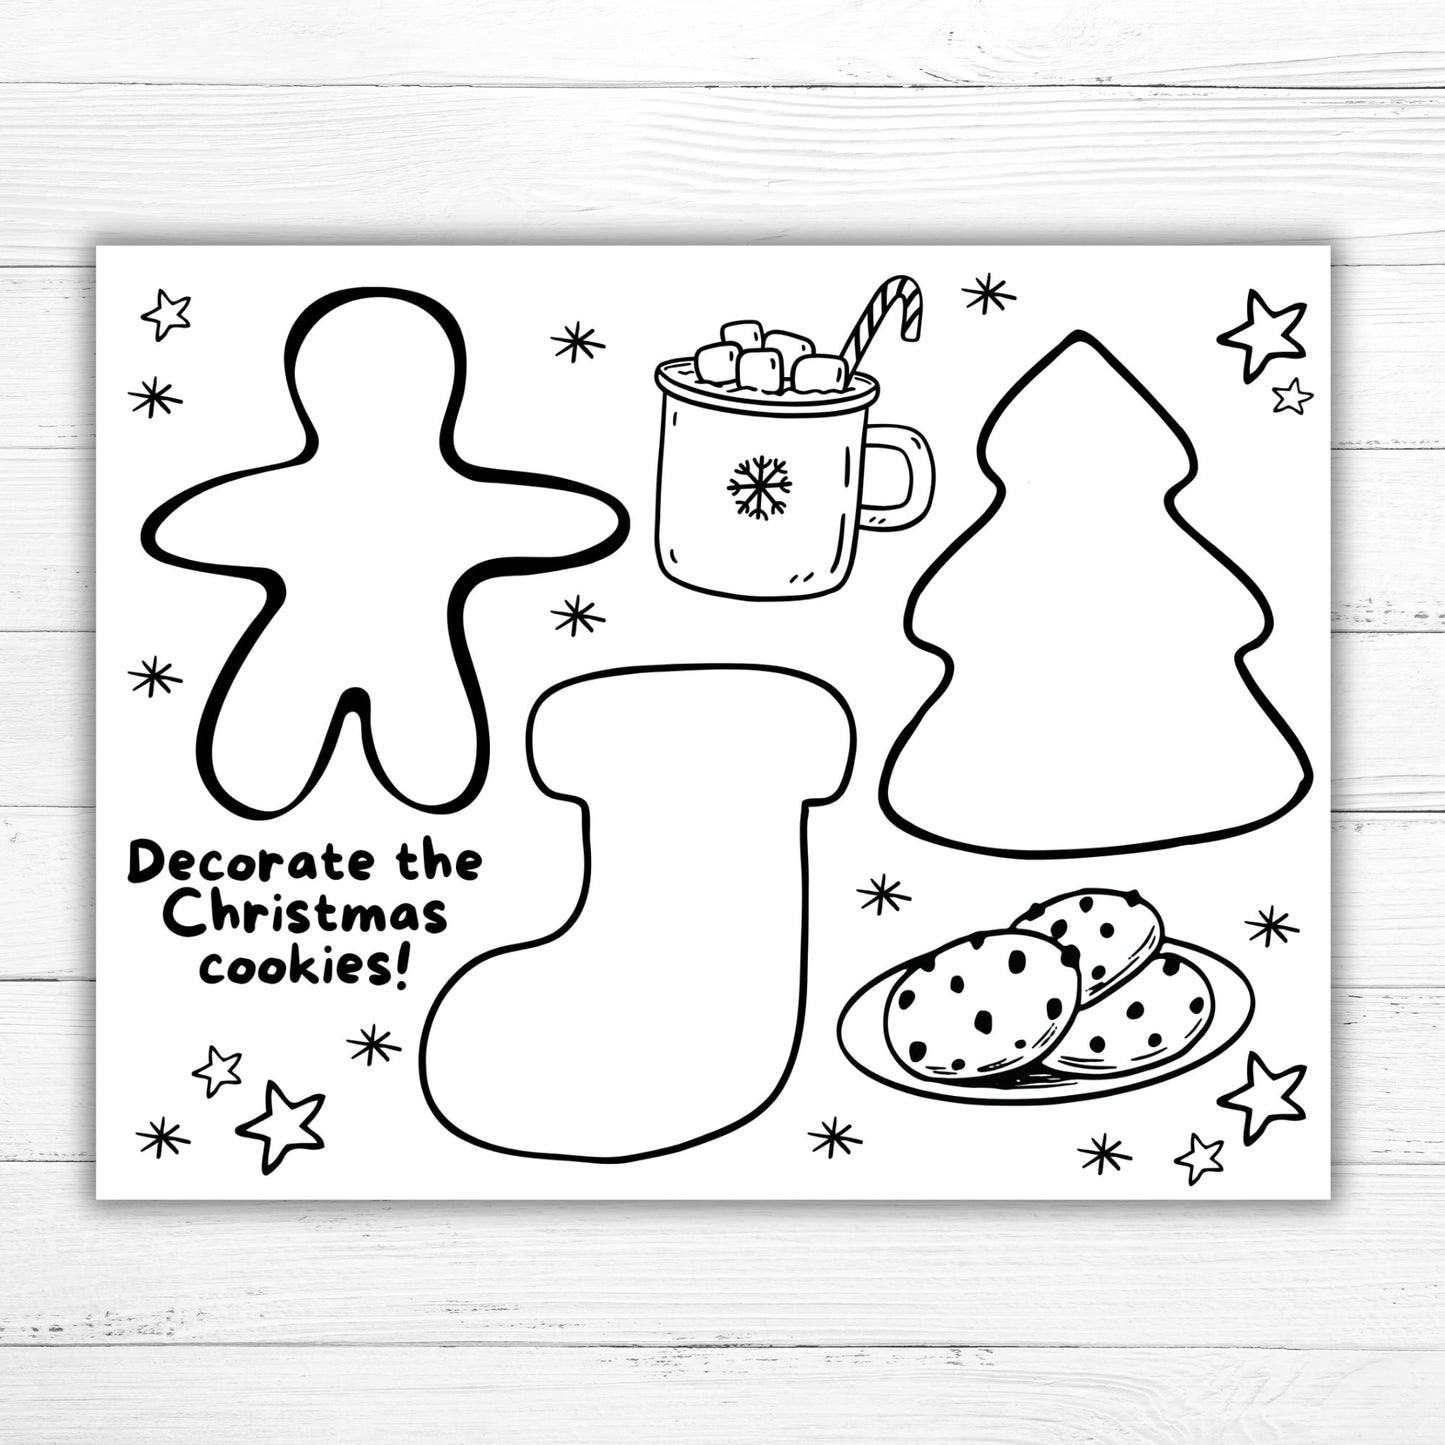 Christmas Placemat Activity Pack, Printable Christmas Placemats, Christmas Activities for Kids, Christmas Worksheets, Christmas Printables